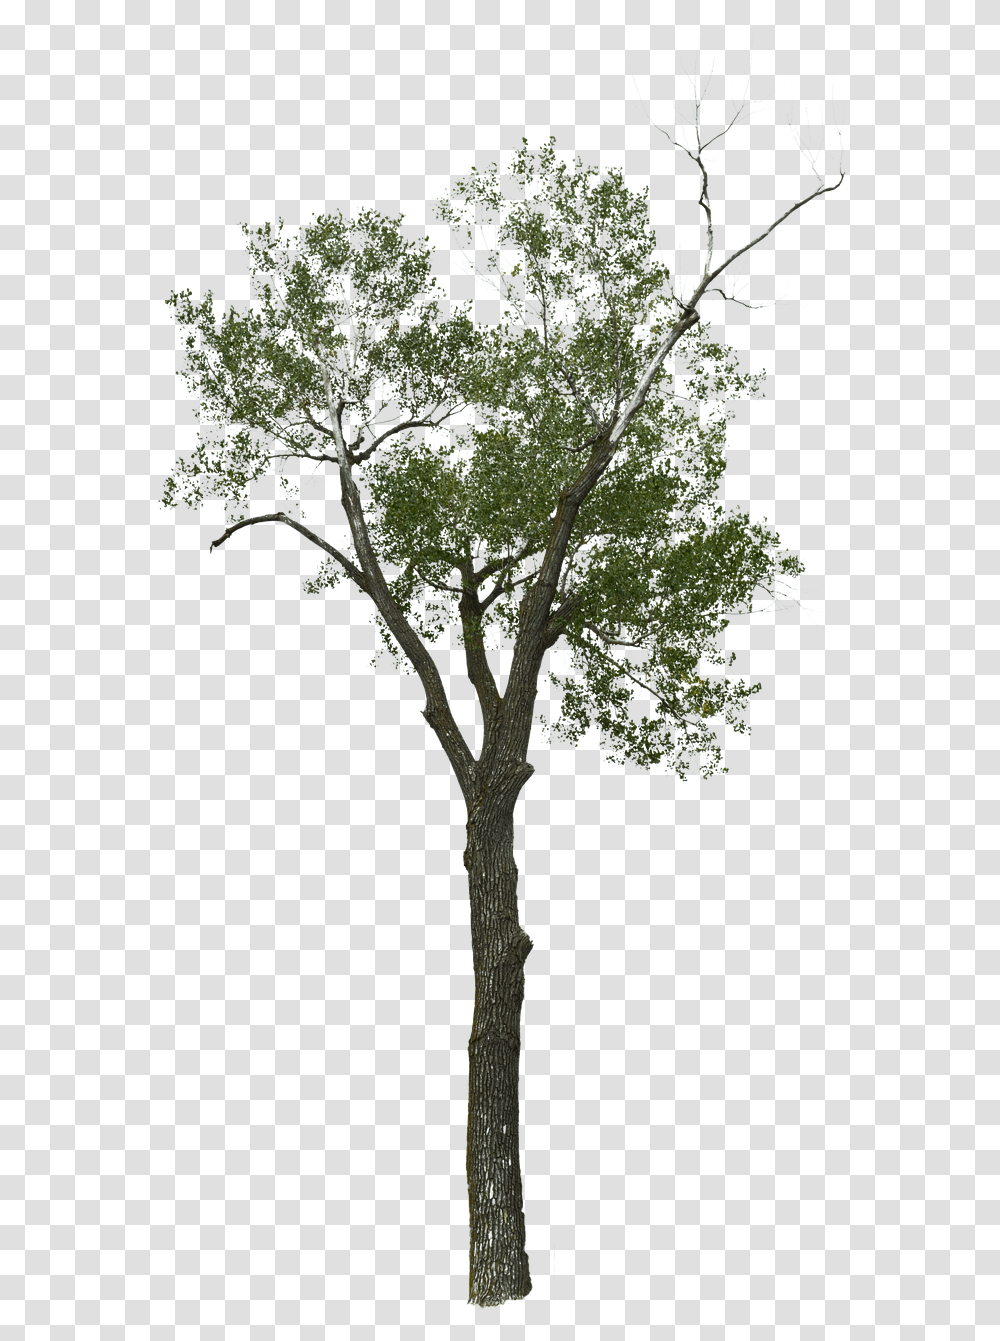 Dead Tree With No Free Image On Pixabay Tree, Plant, Cross, Symbol, Tree Trunk Transparent Png